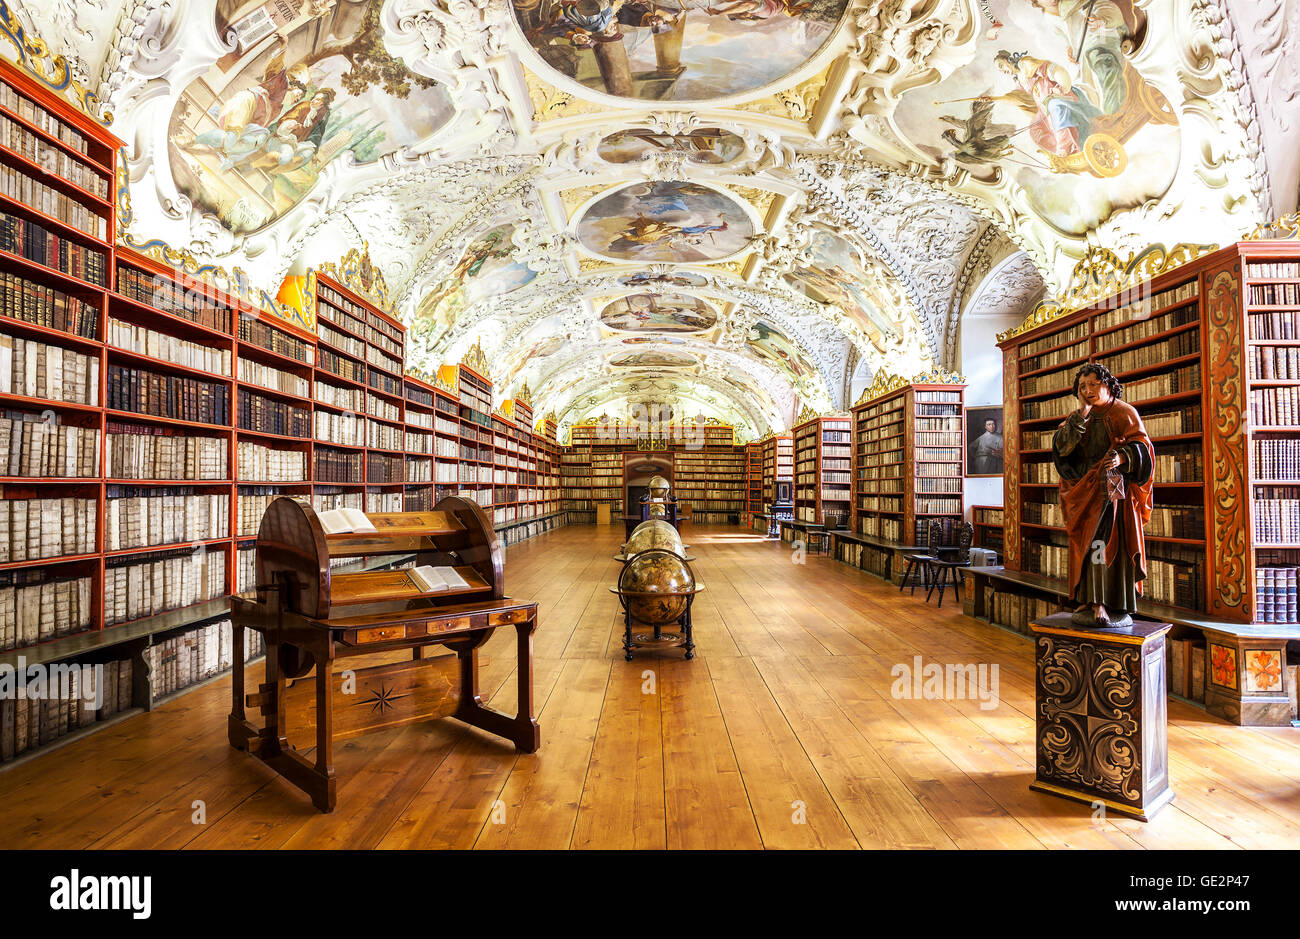 PRAGUE, CZECH REPUBLIC - JUNE 15, 2014: The Theological Hall in Strahov monastery in Prague, one of the finest library interiors Stock Photo